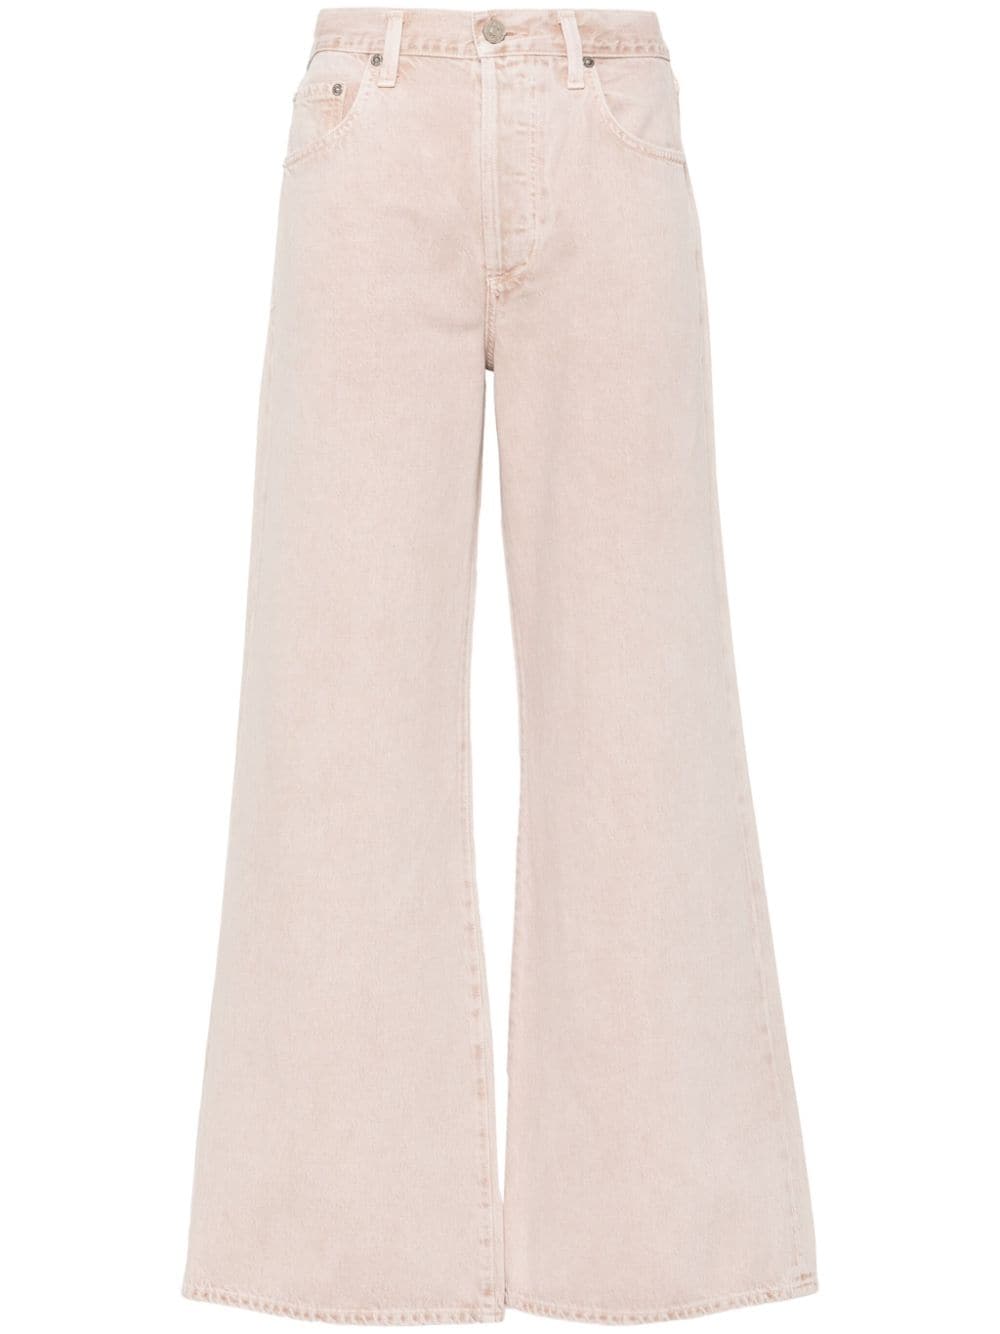 Citizens of Humanity Beverly bootcut jeans - Pink von Citizens of Humanity